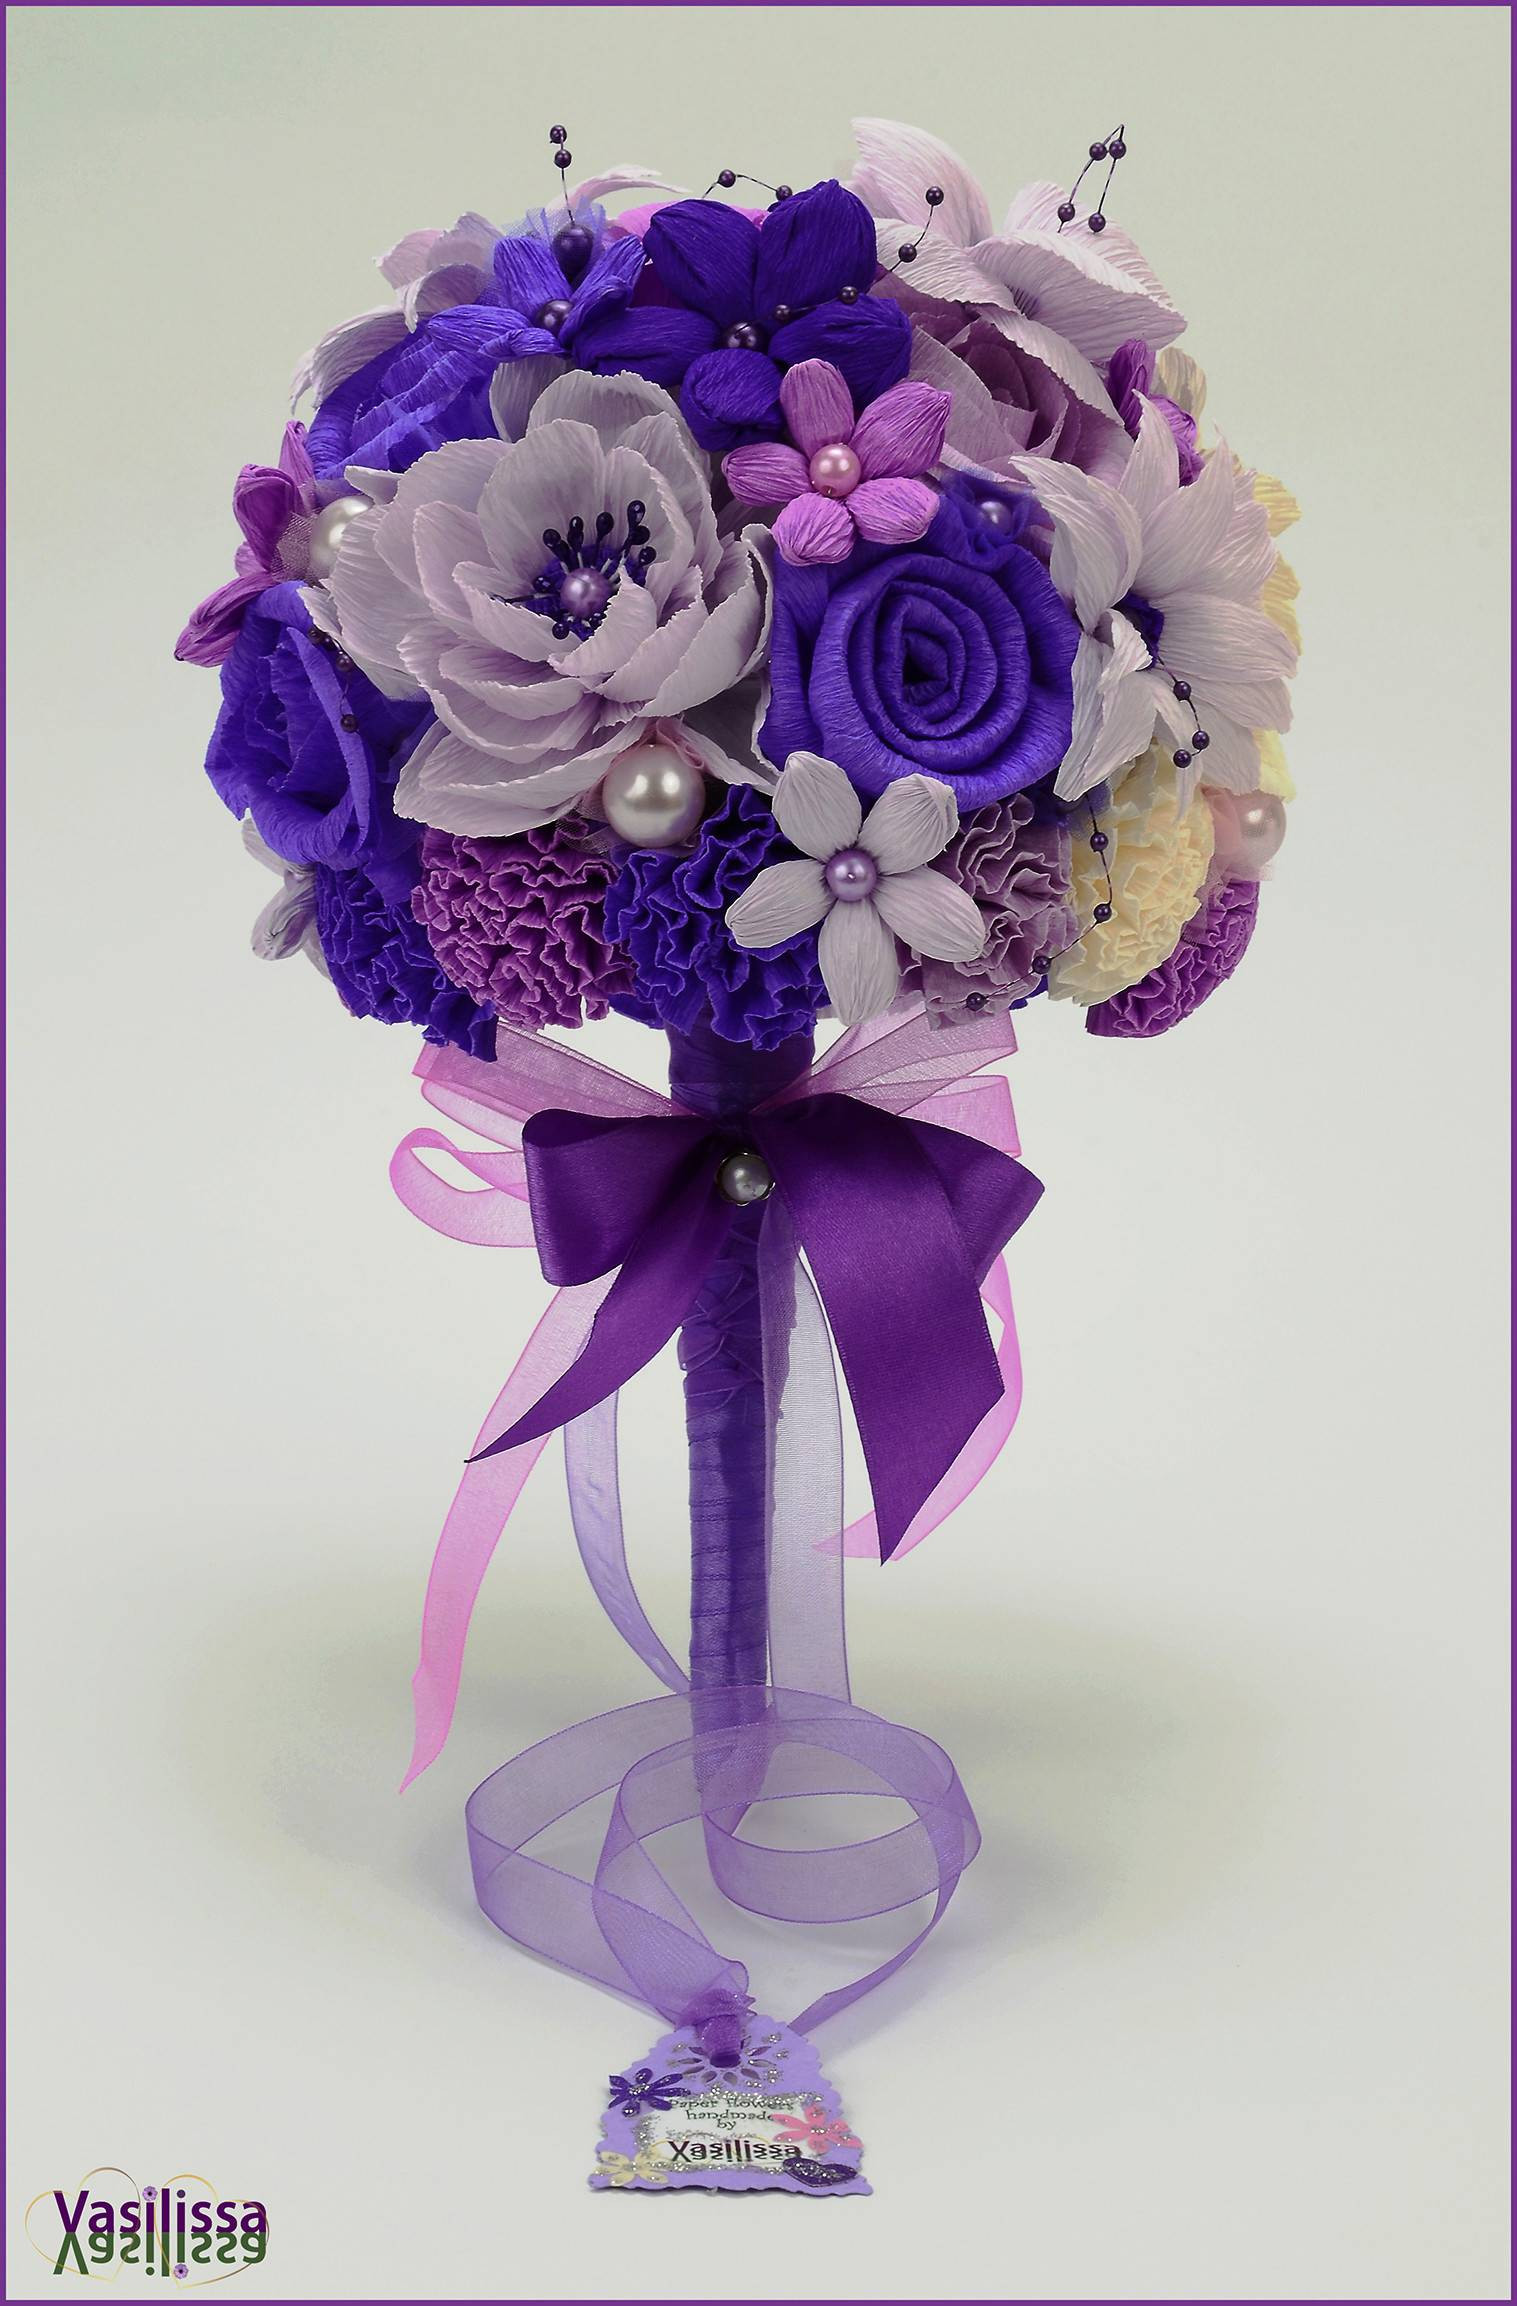 14 Fashionable Calla Lily Tall Vase 2024 free download calla lily tall vase of purple and yellow wedding centerpieces lovely vjena ani buket od in purple and yellow wedding centerpieces lovely vjena ani buket od kala calla lily bouquet design